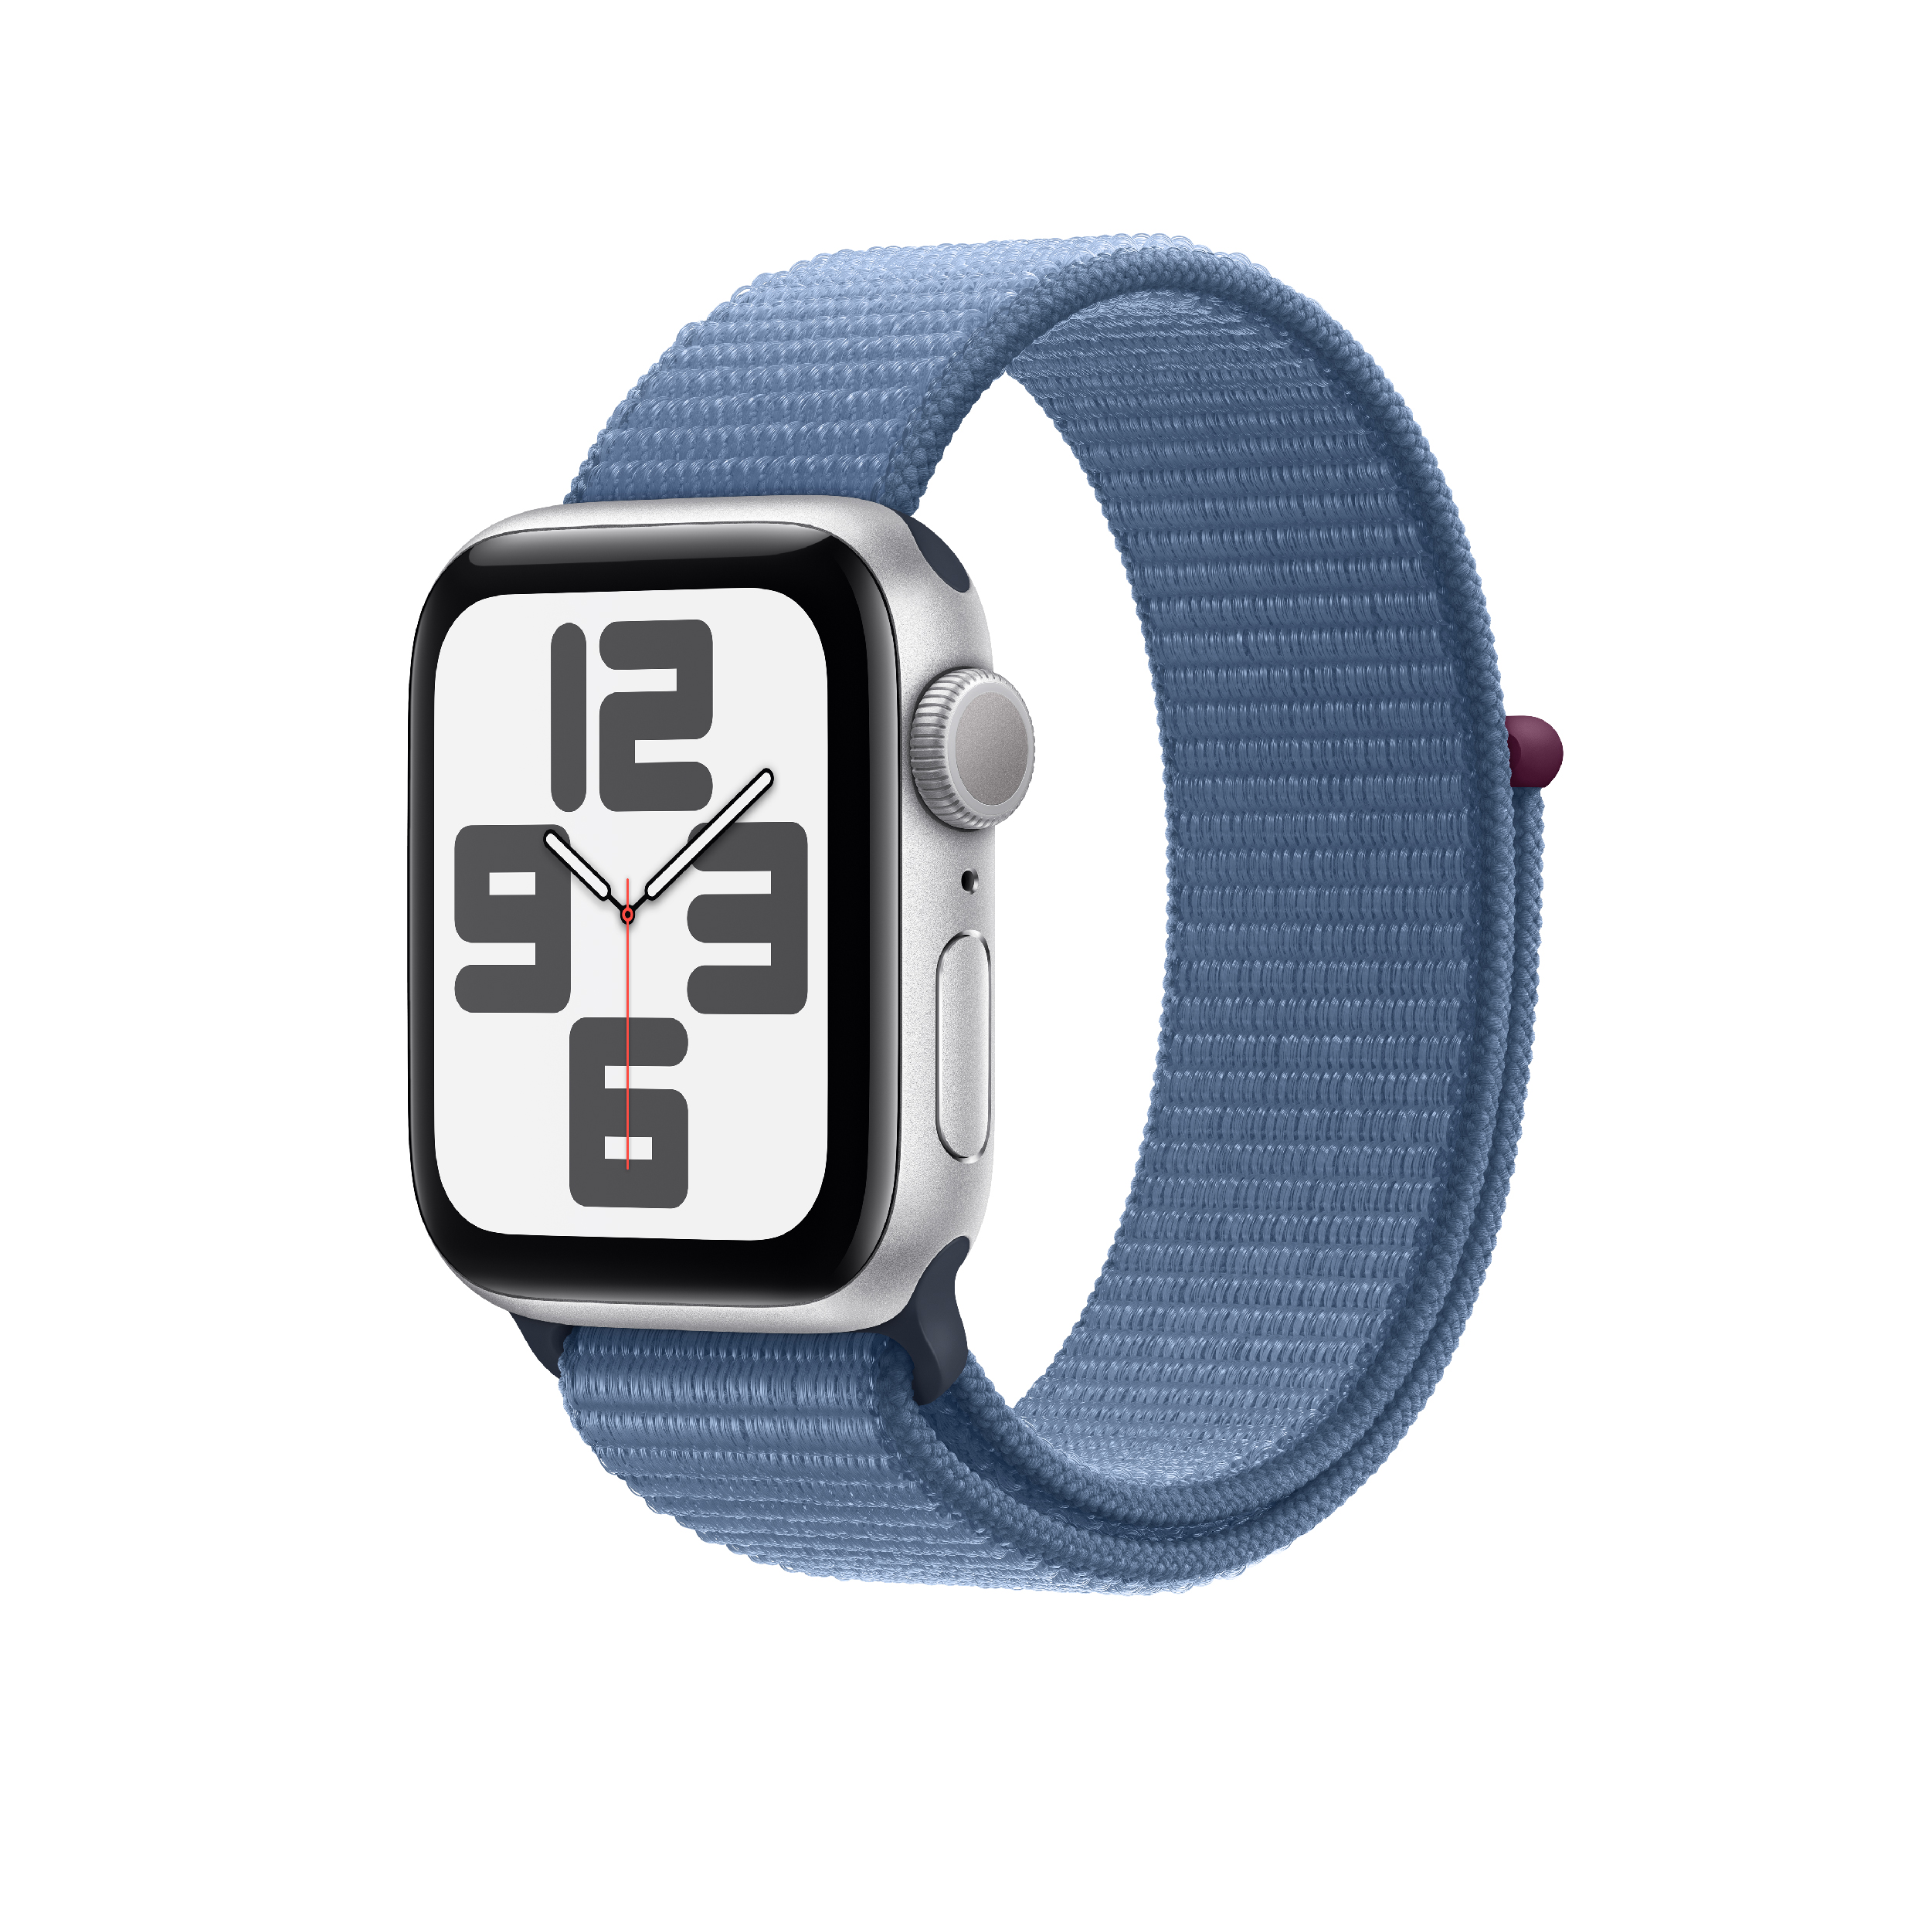 APPLE Smartwatch SE GPS Cellular 40 mm, Silver Aluminium with Storm Blue Sport Loop One Size | Apple| Image 2